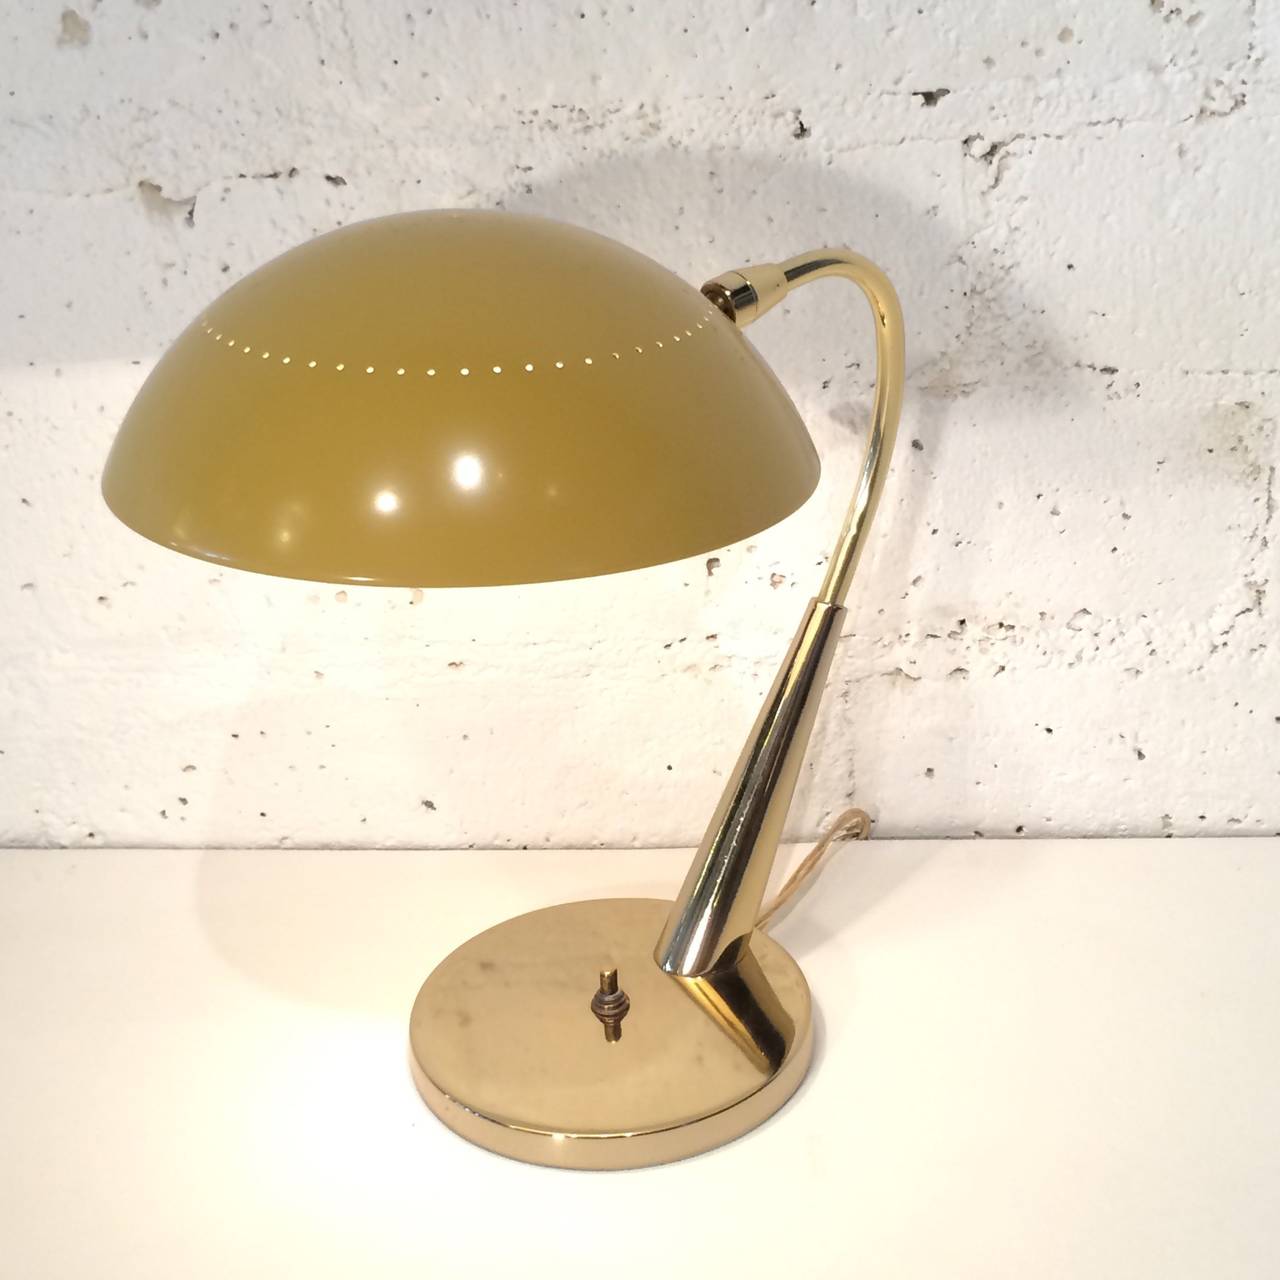 A 1960 desk lamp made by Laurel Studios. 
Brass with a mustered colored painted shade.
Newly rewired.